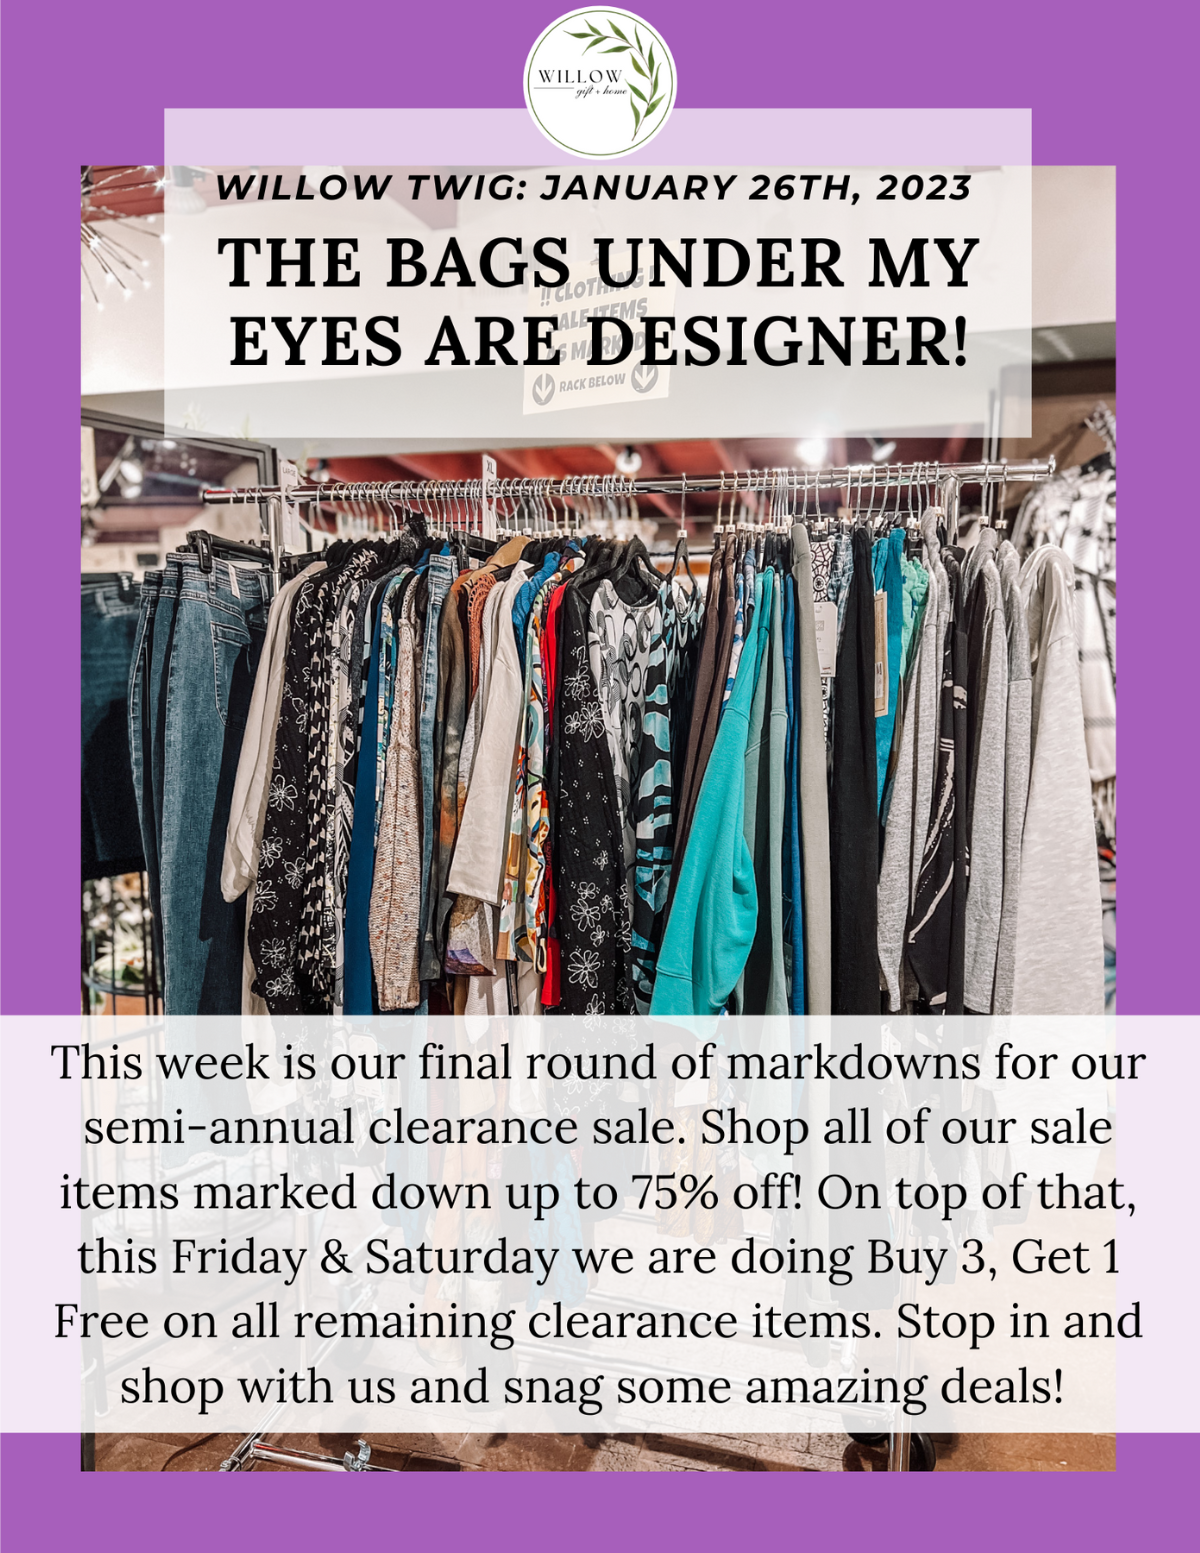 The bags under my eyes are designer! Friday and Saturday buy 3 get one free! BOGO